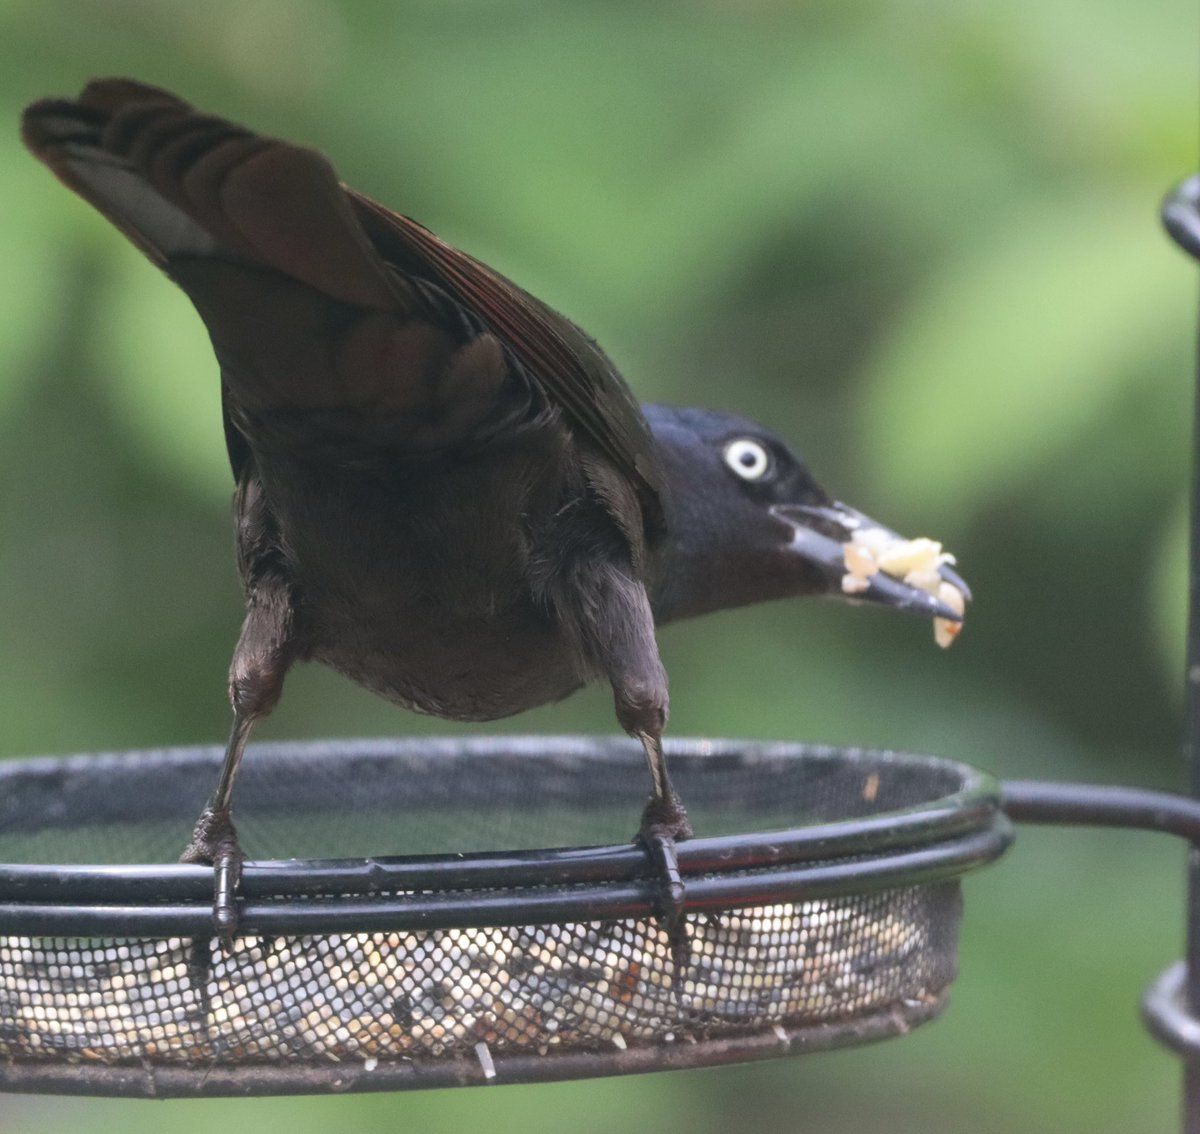 Welcome #Thursday ❤️ this Common Grackle spent so much time gathering huge mouthfuls, to feed hatchlings? Peanuts and bugs? #grackle #commongrackle #birds #birding #birdwatching #birdphotography #BirdTwitter #naturelovers #naturephotography #TwitterNatureCommunity ❤️